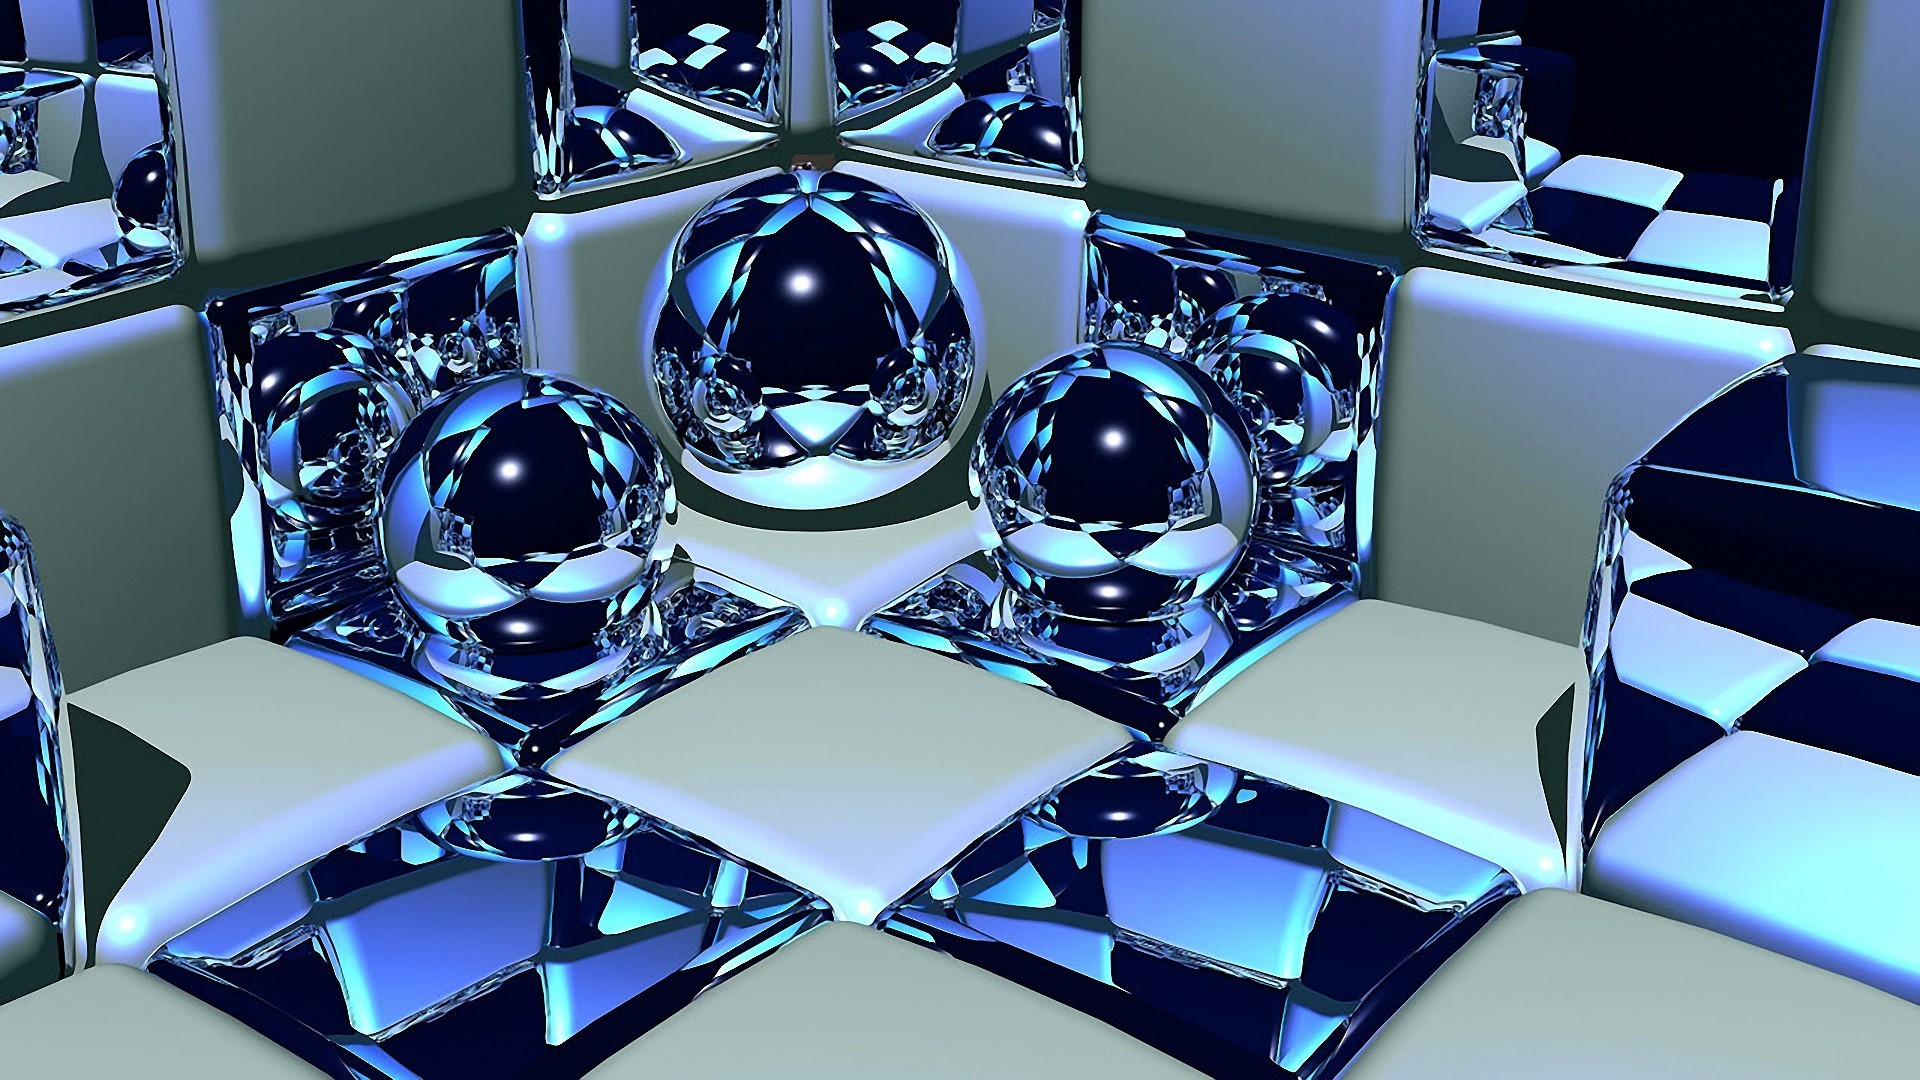 1920x1080 3d Cubes And Balls 6 Wallpaper Background Hd With Resolutions 1920 